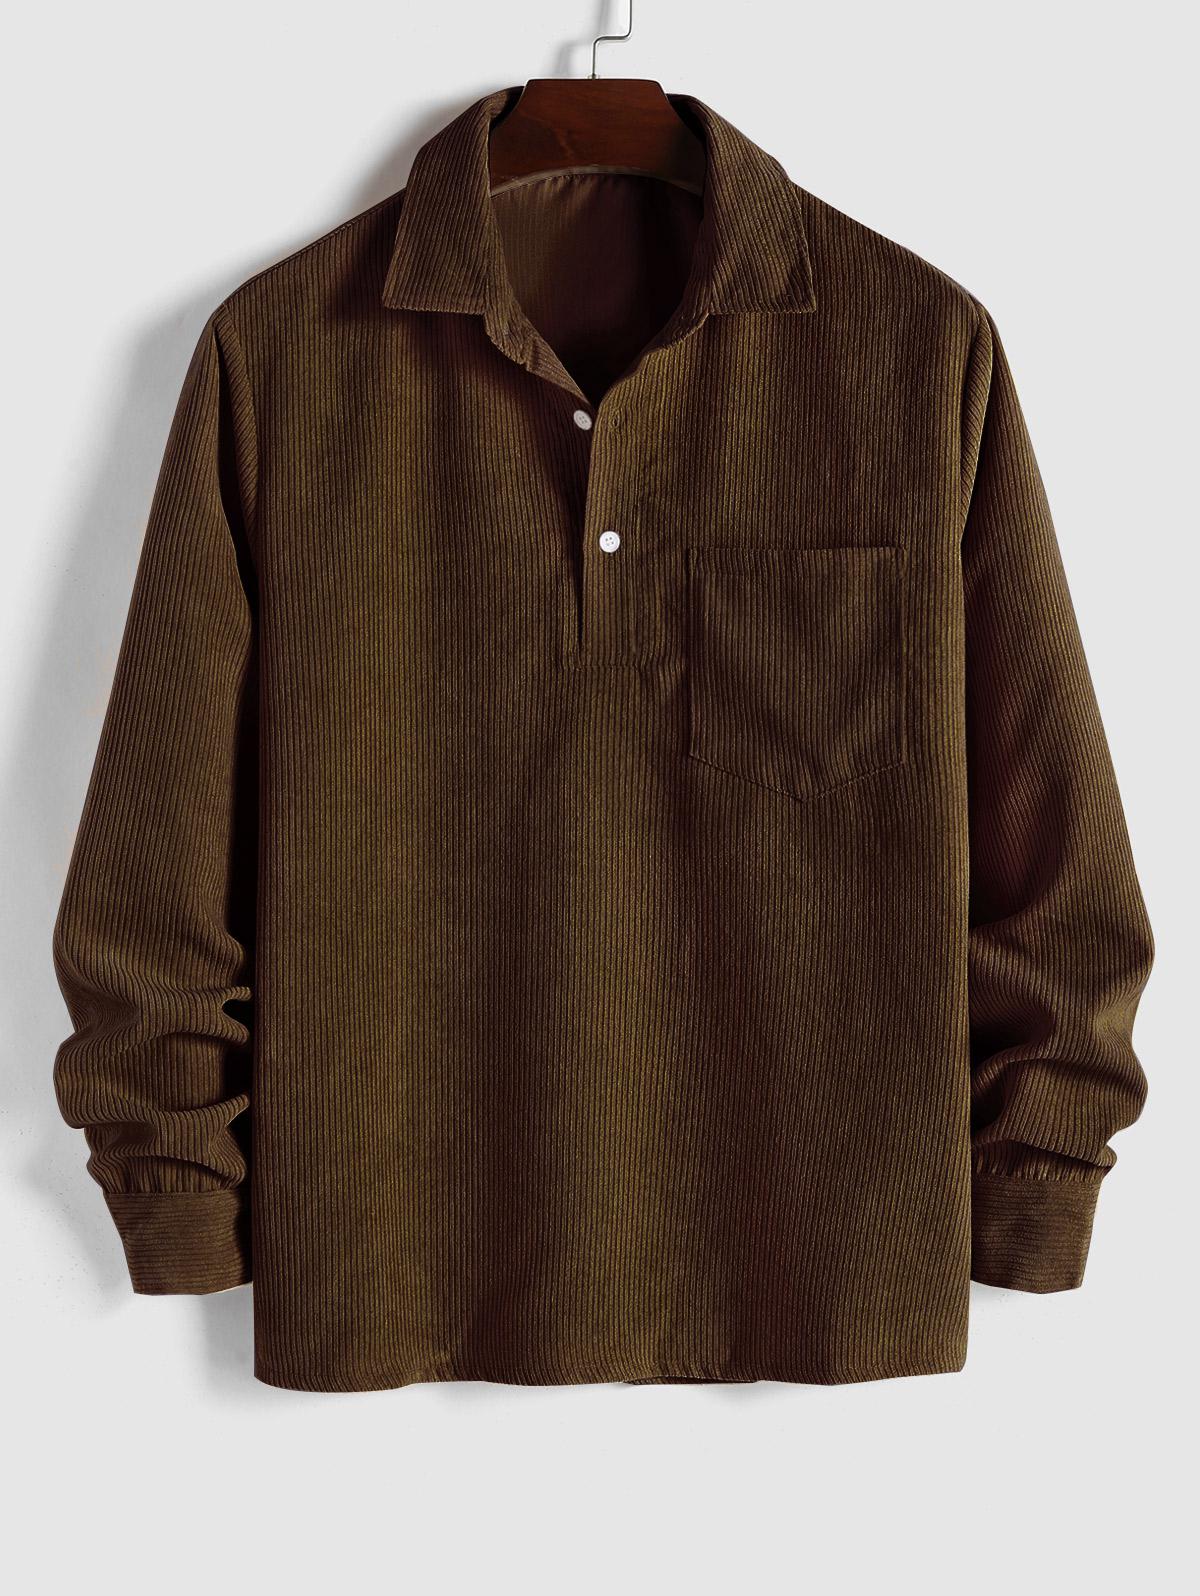 ZAFUL Men's ZAFUL Solid Color Half Button Pocket Corduroy Long Sleeves Collared Shirt S Coffee